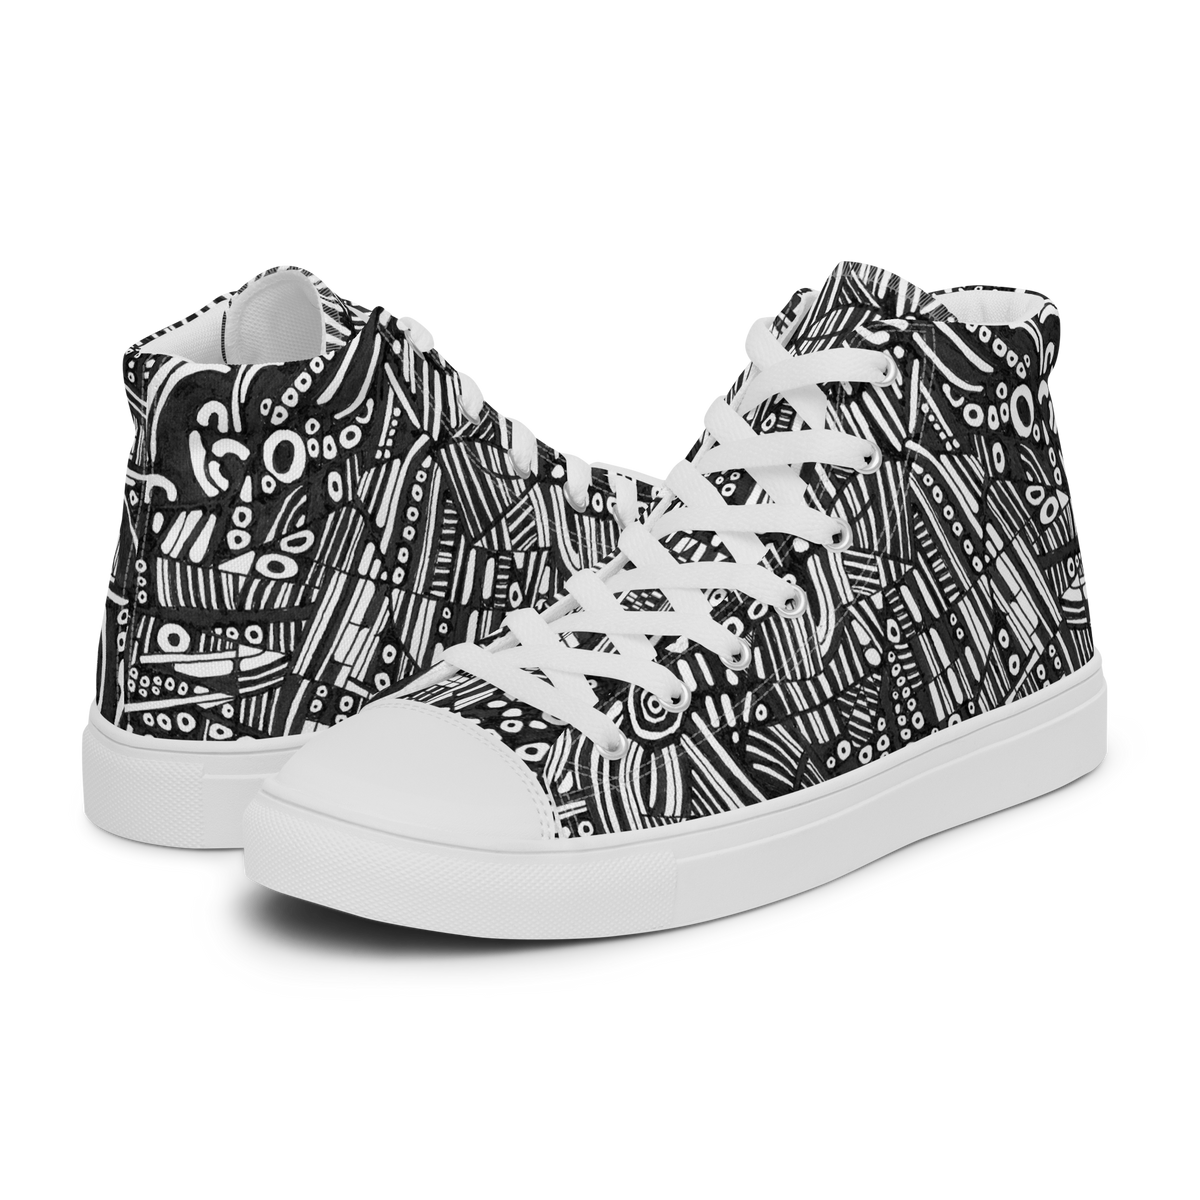 Armillary Sphere (Men’s high top canvas shoes)